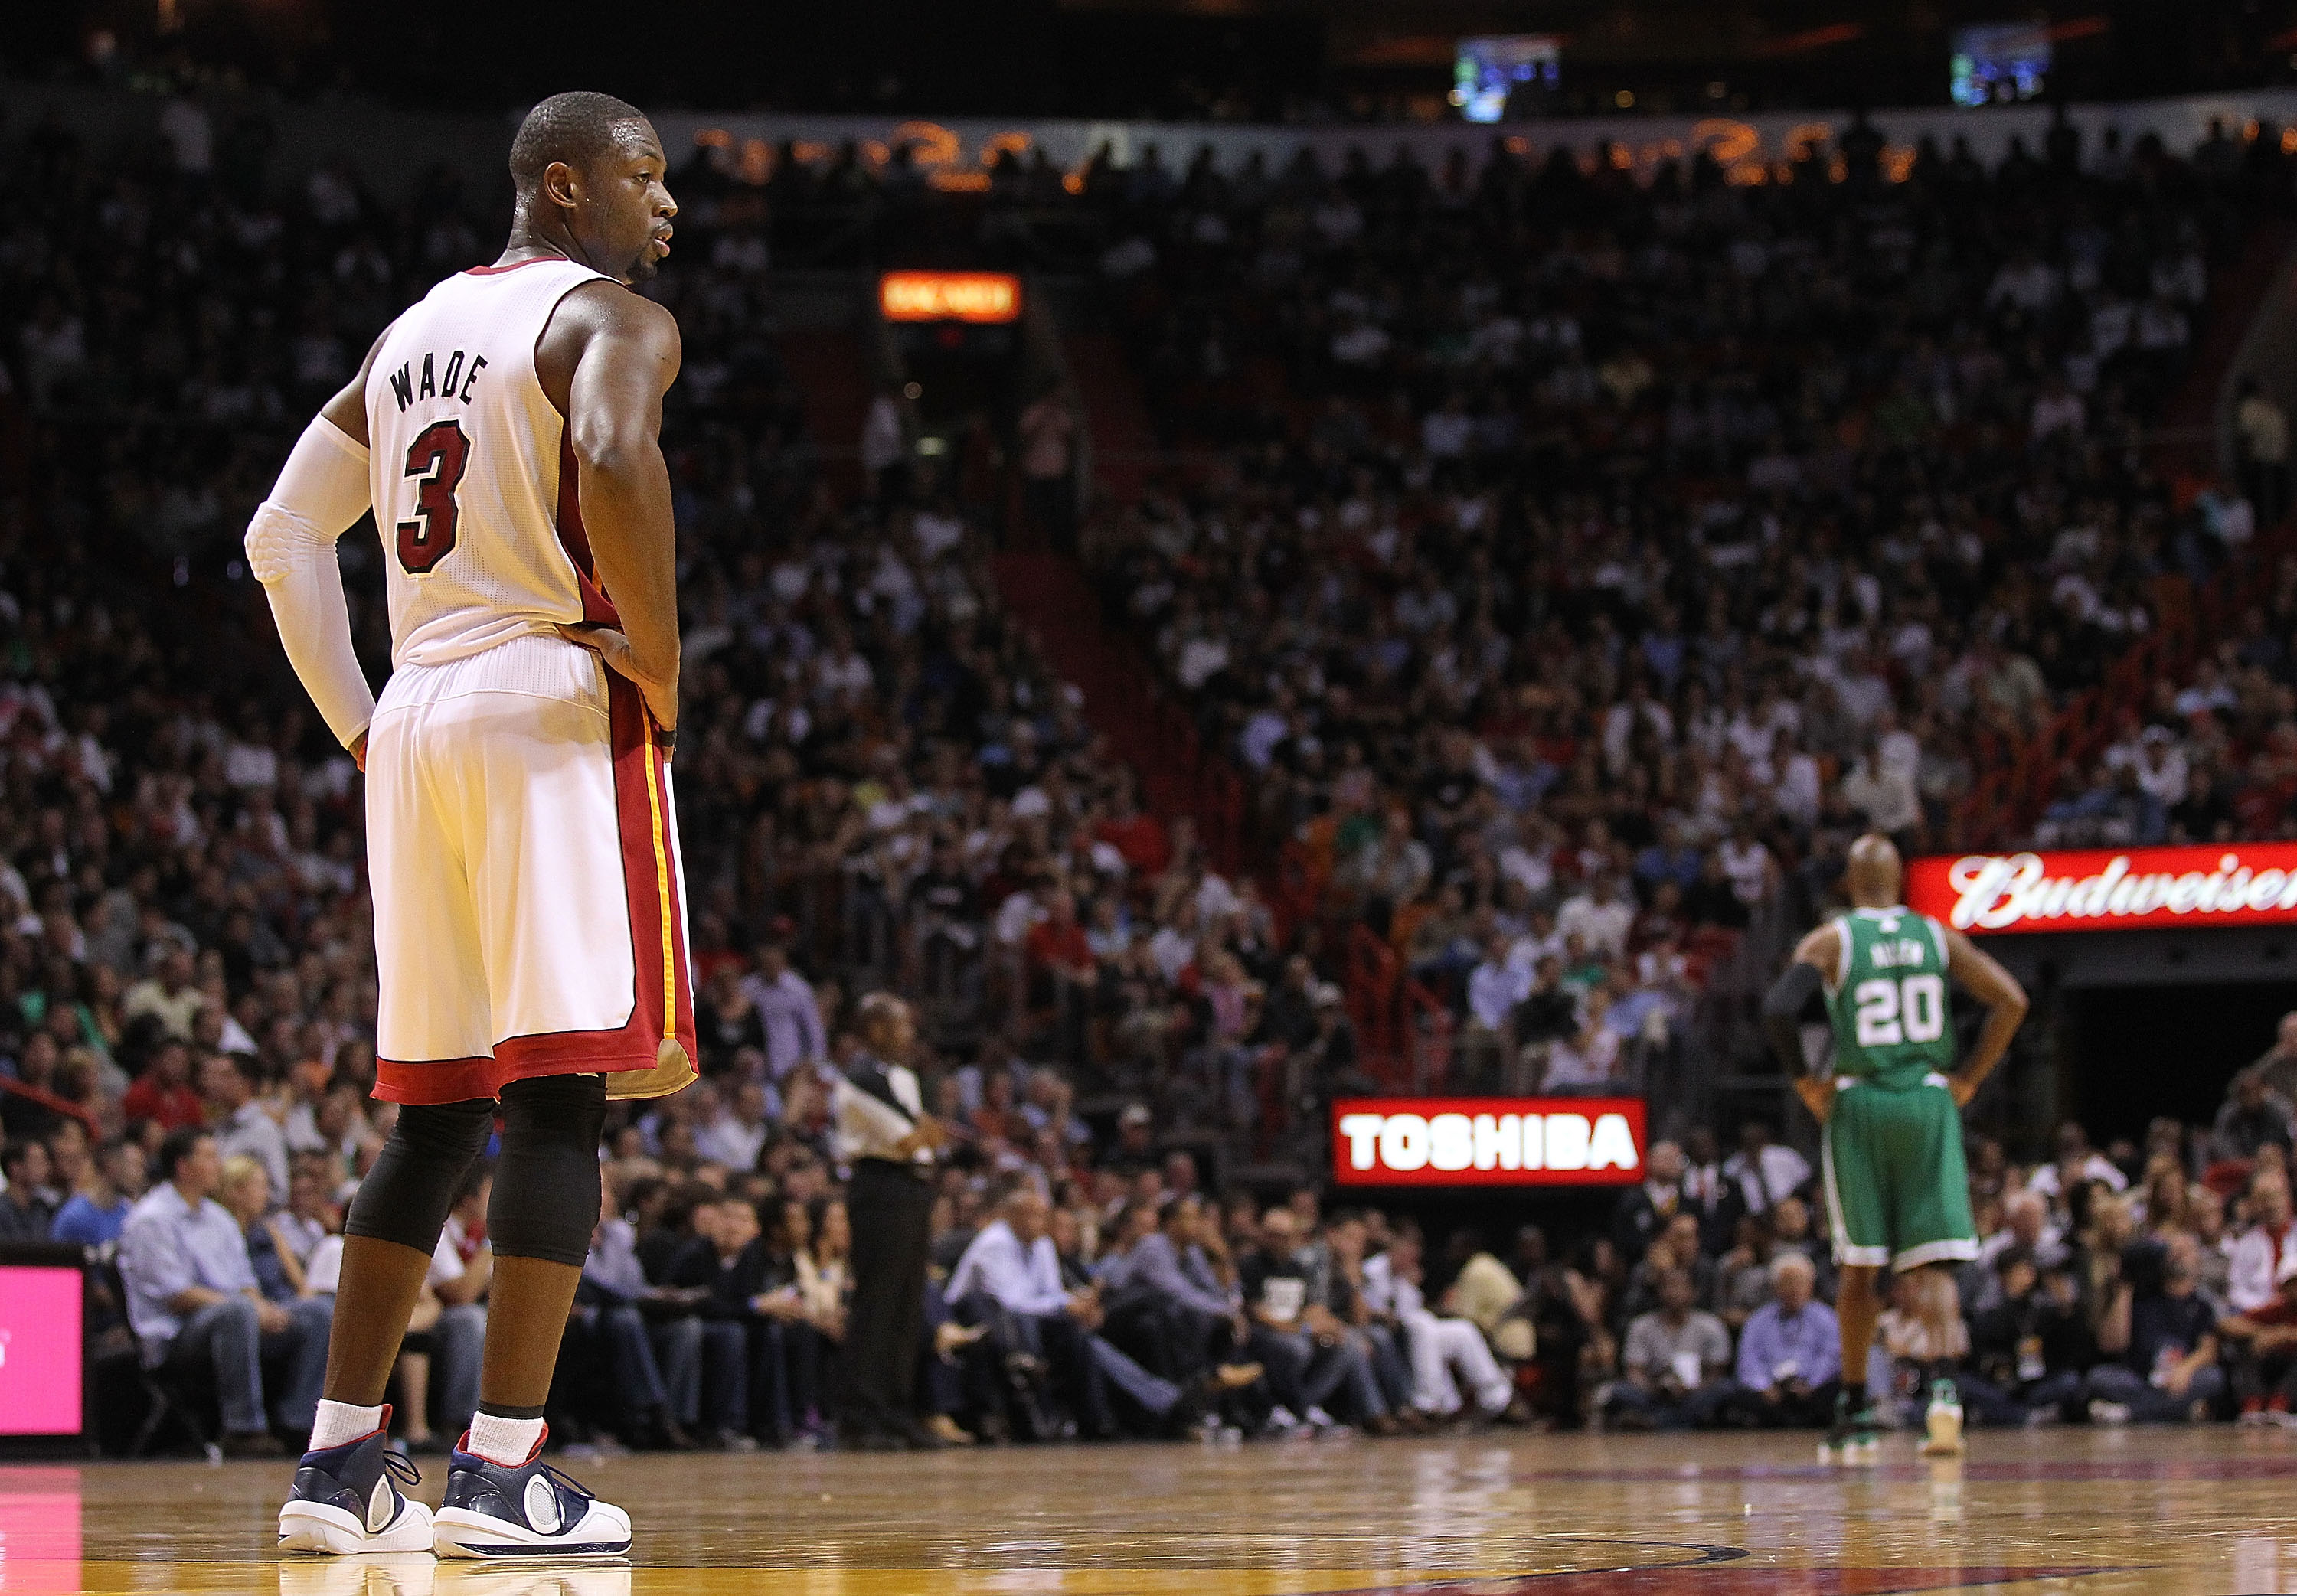 Goin' to Miami LeBron James ends circus, says he's joining Wade and Bosh  with Heat – Twin Cities